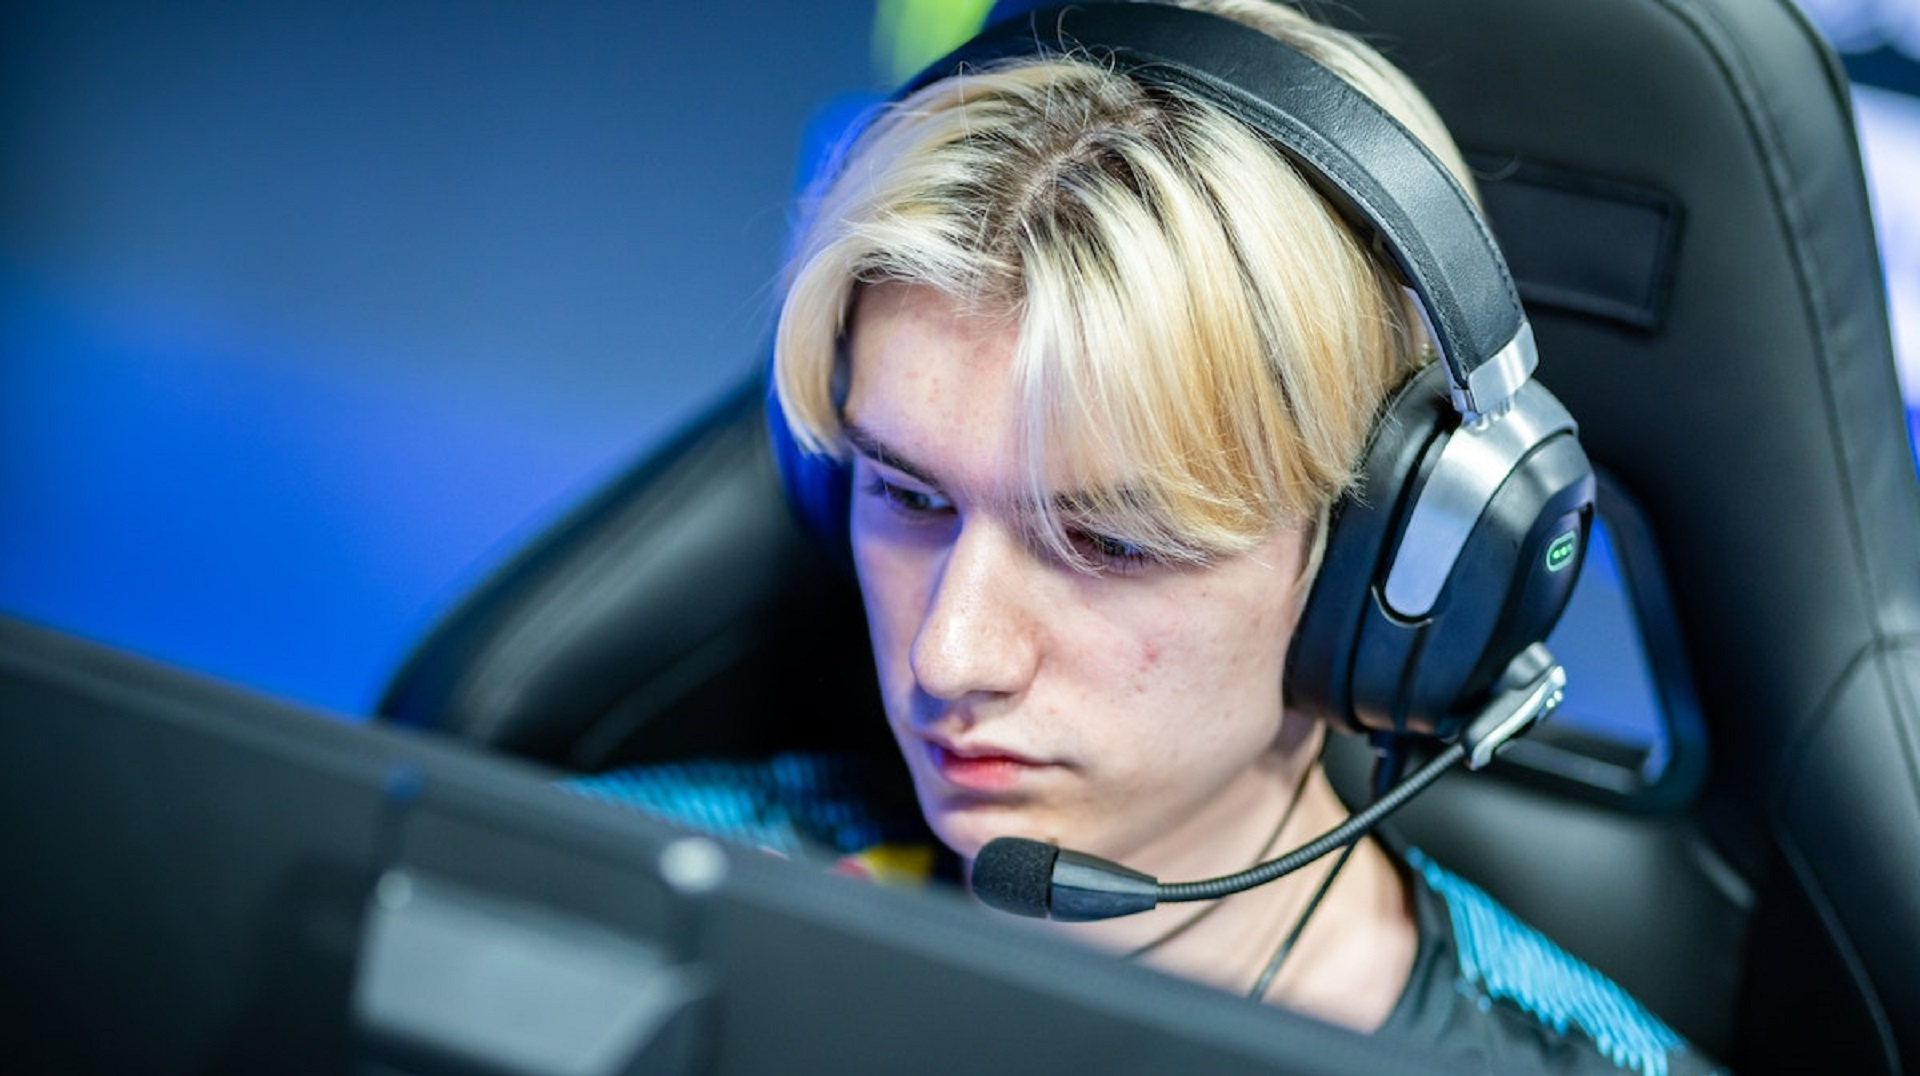 PCH3LK1N: W0nderful Is Not s1mple, Replacement Is Not Equal